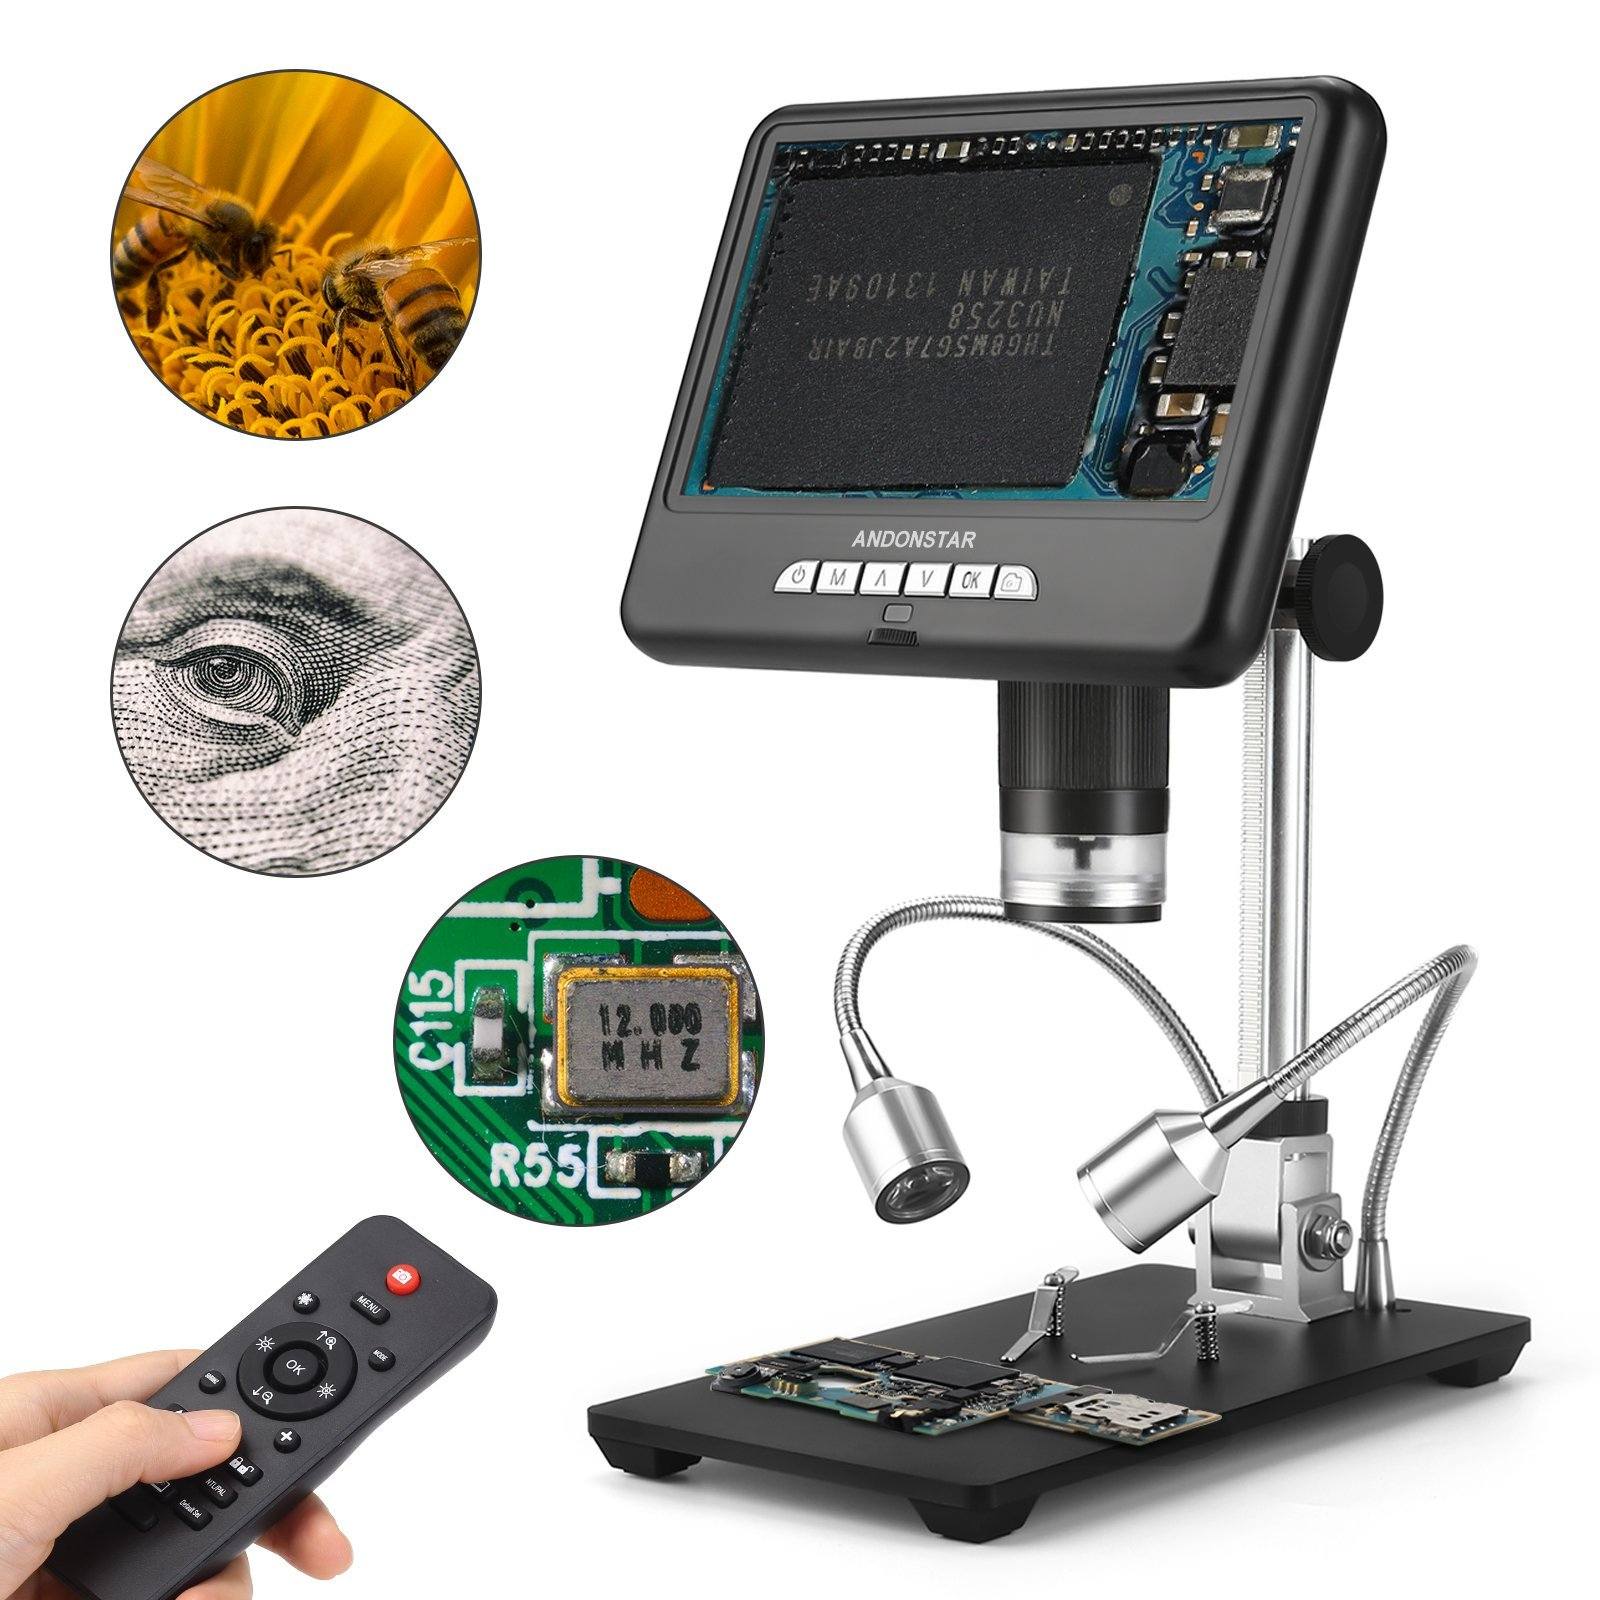 Andonstar AD207 7-inch LCD Screen 2MP 3D Digital Microscope for PCB Soldering